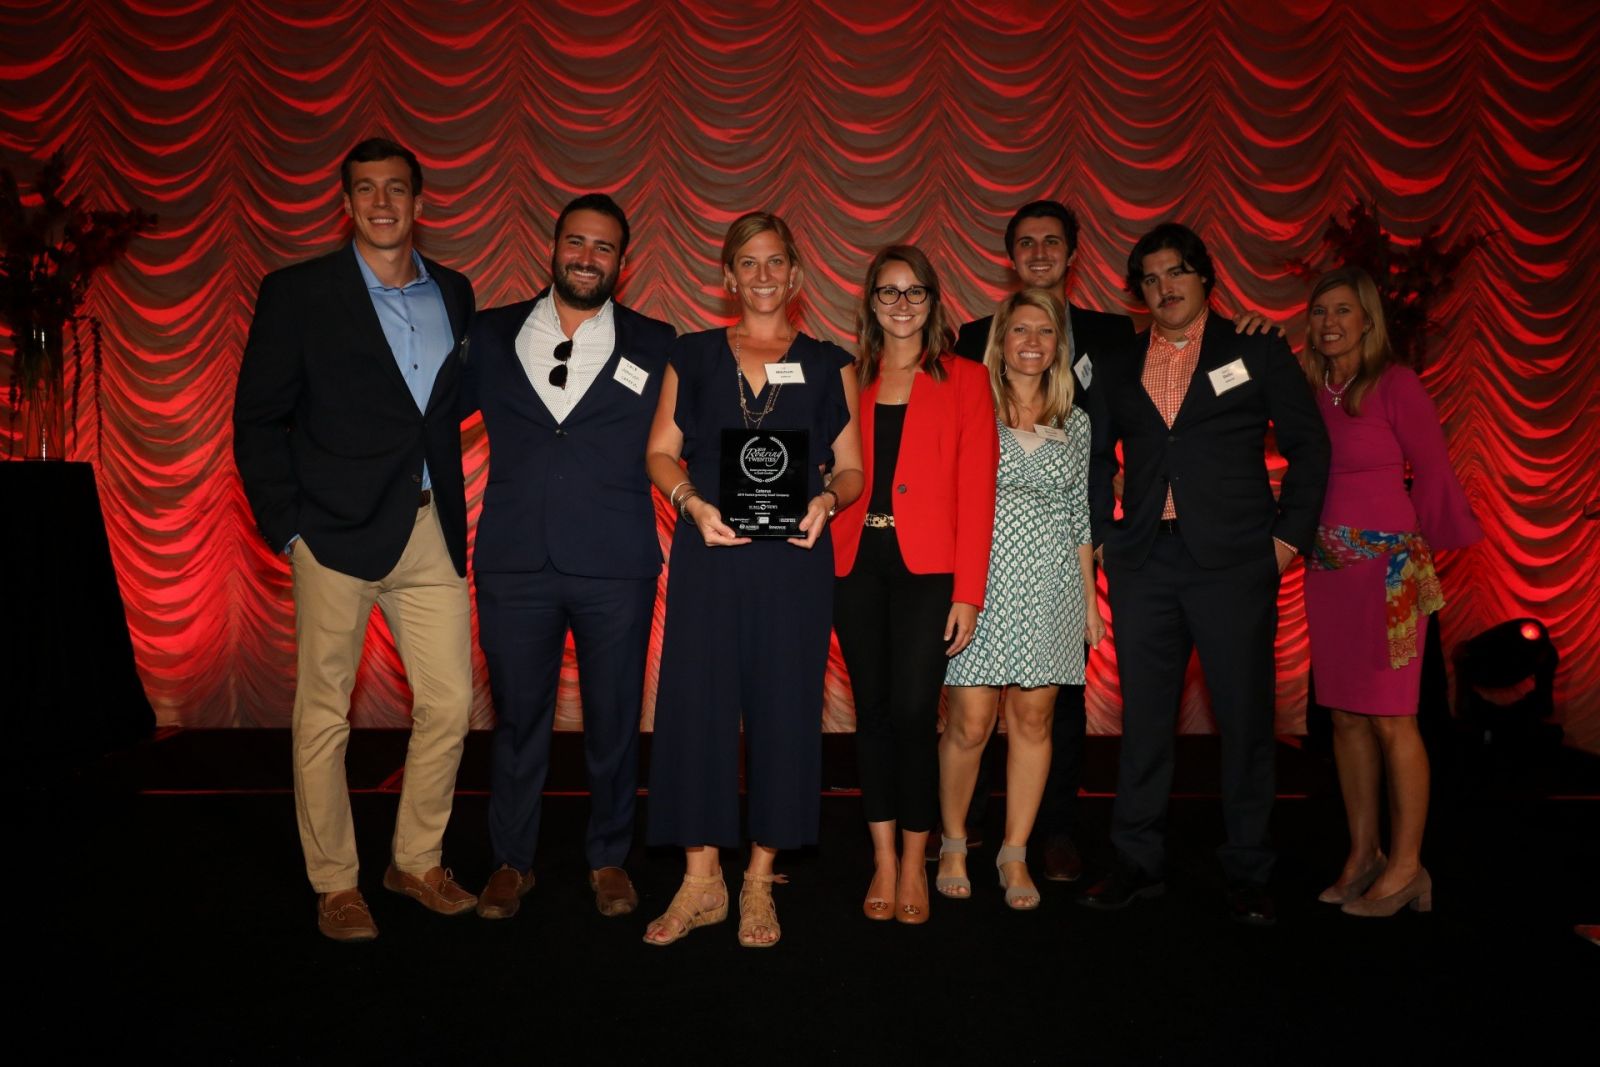 Winners of Roaring 20s recognition smile on Thursday. The annual SC Biz News event recognized the state's 20 fastest-growing companies in large and small categories. (Photo/Kim McManus)